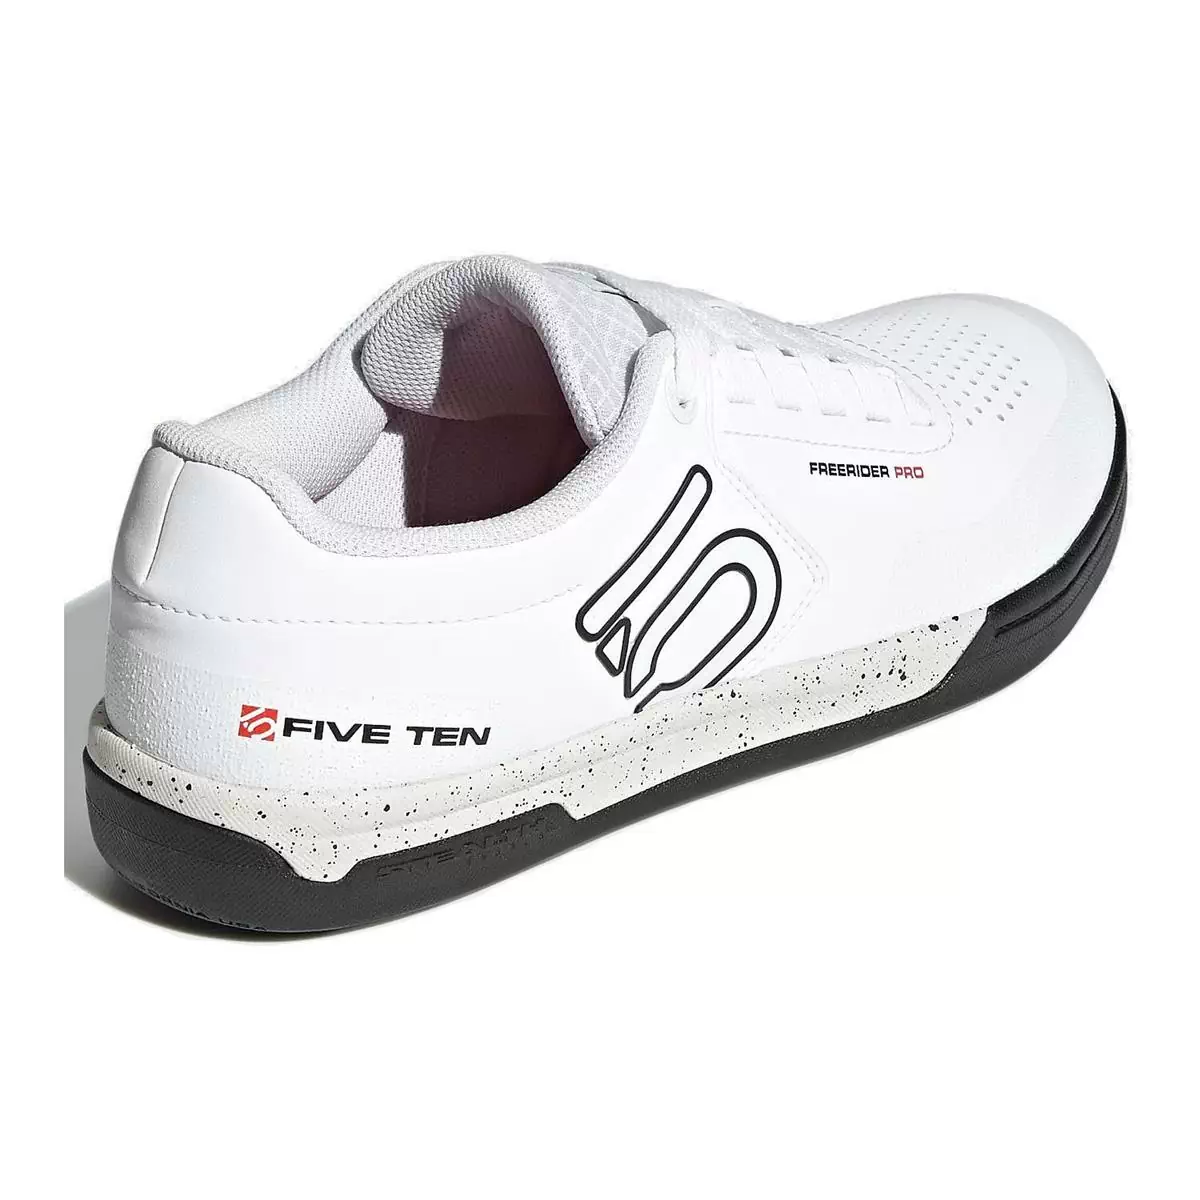 Chaussures Plates VTT Freerider Pro KYX44 Blanc Taille 50,5 #2